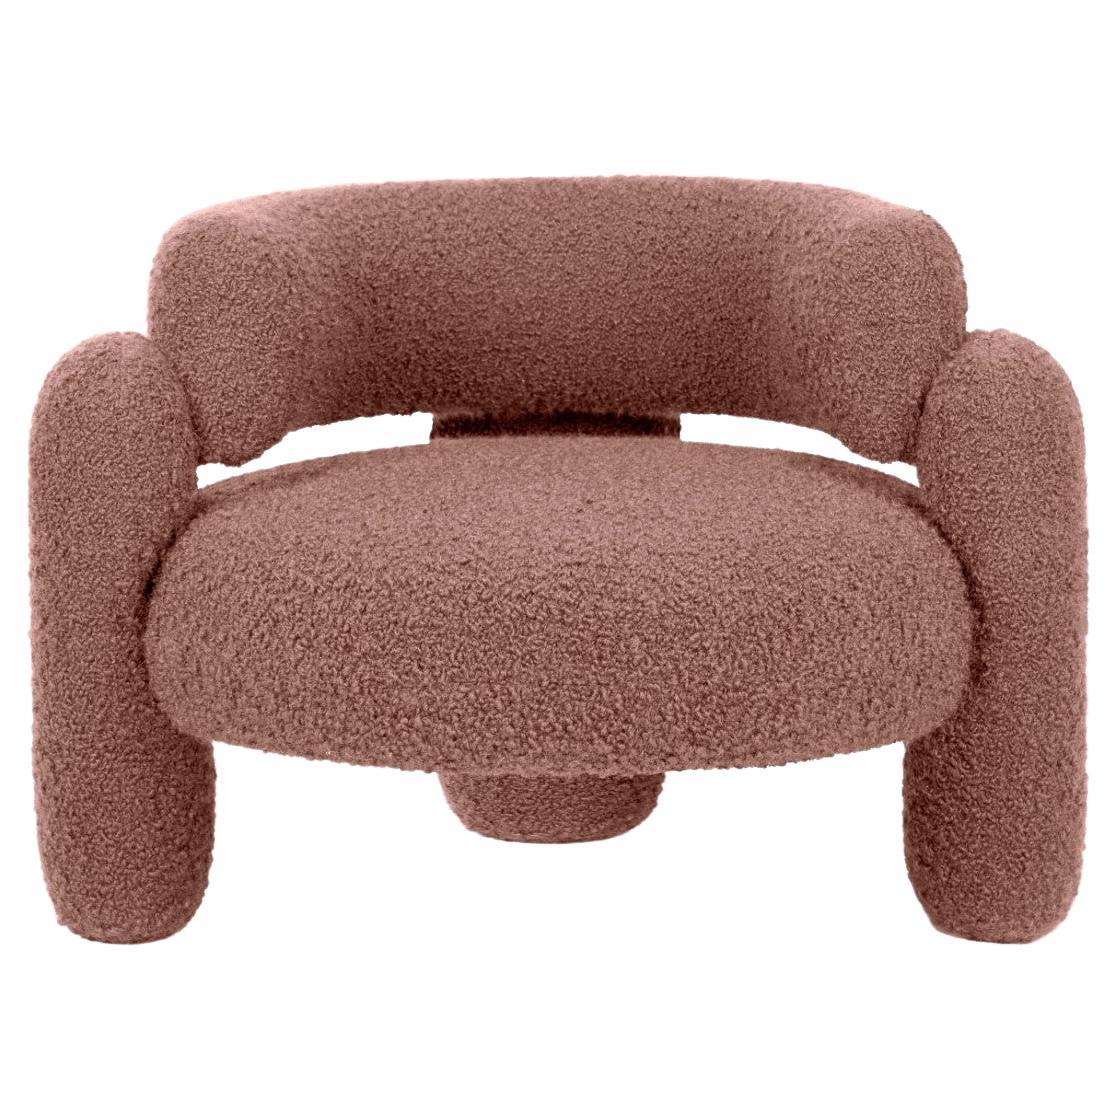 Embrace Cormo Blossom Armchair by Royal Stranger